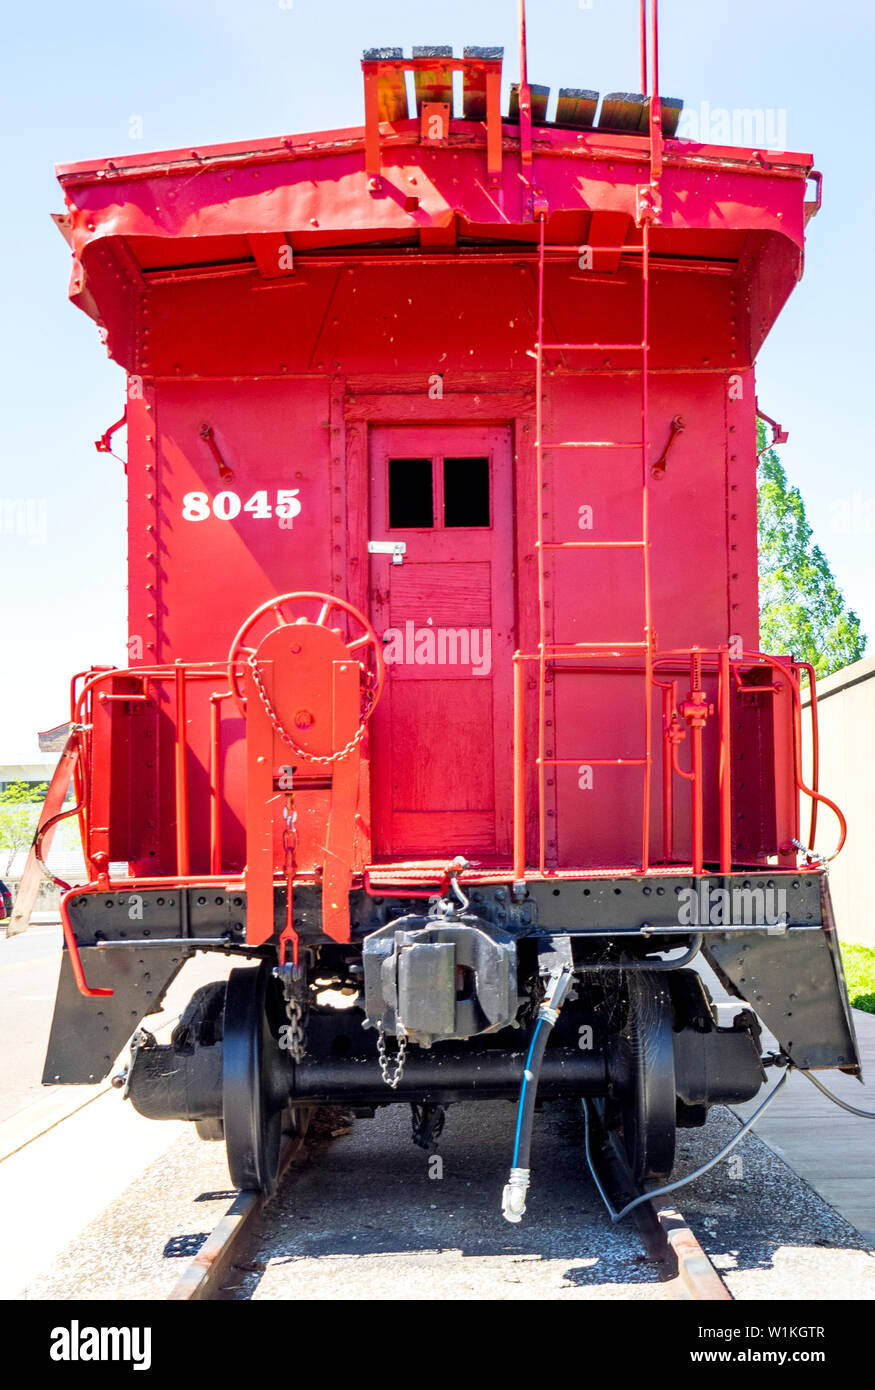 Illinois Central red caboose Wagen Wagen in Paducah Kentucky USA  Stockfotografie - Alamy